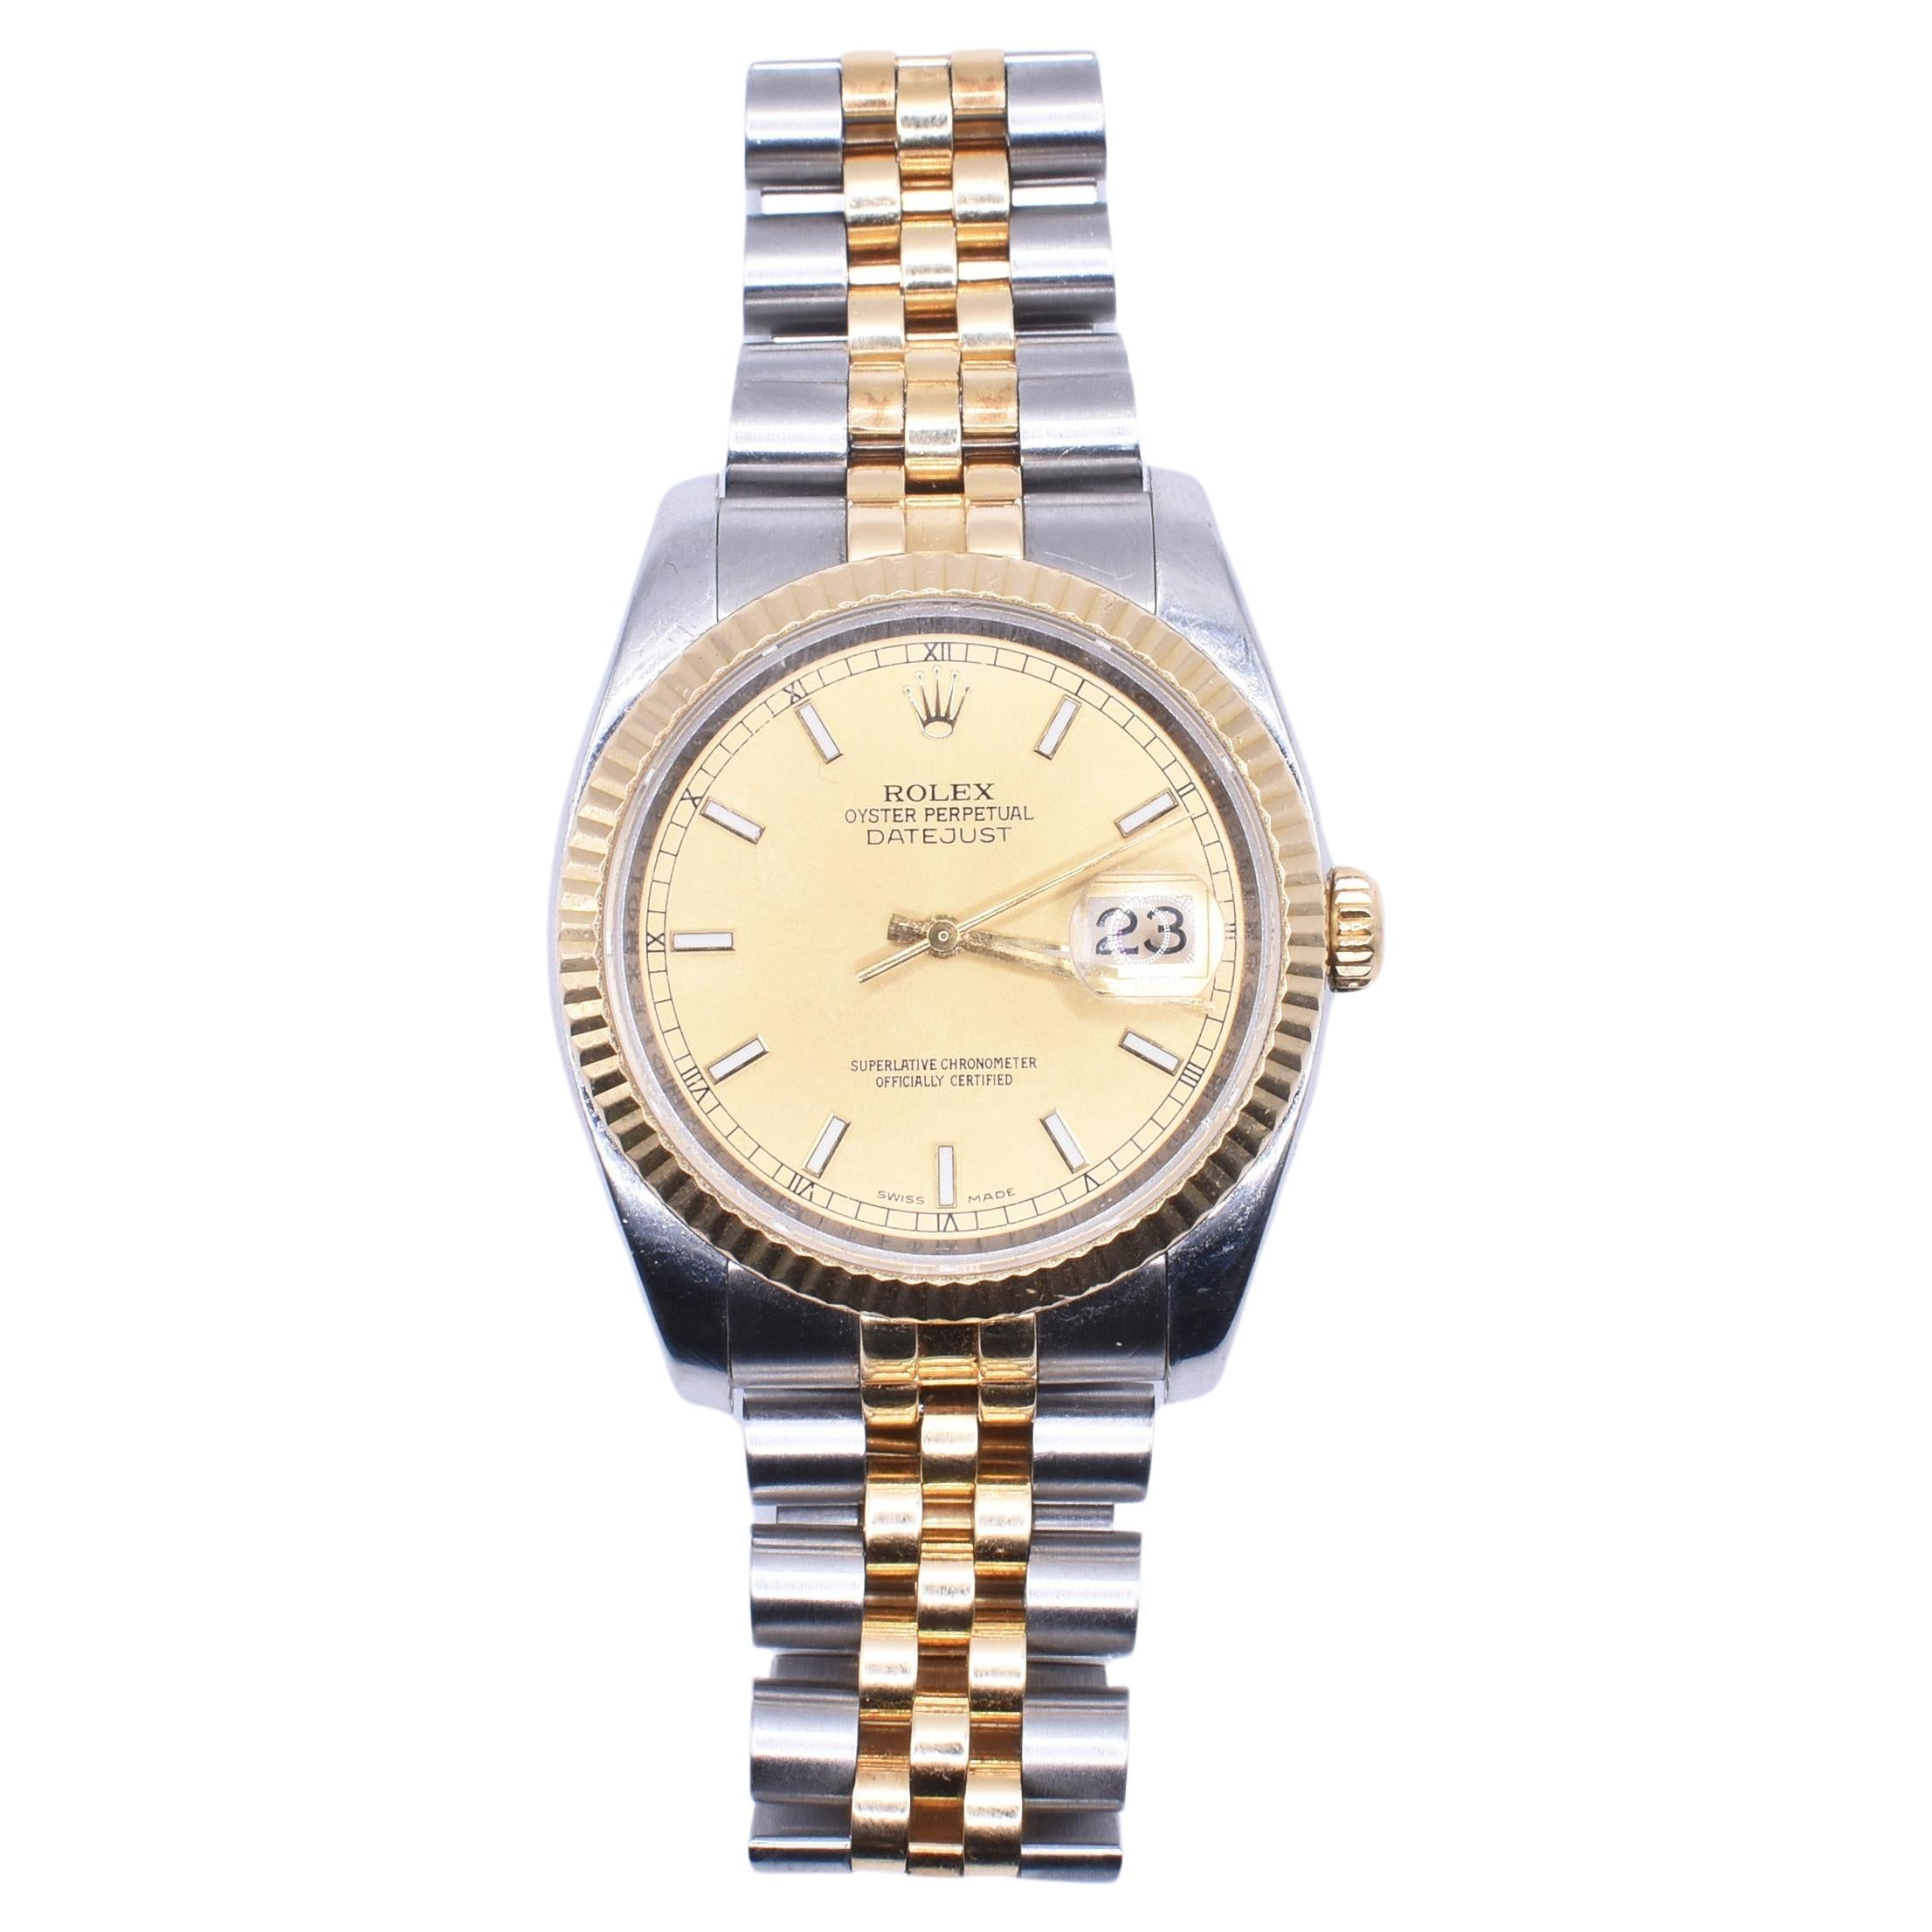 What is 18k gold watch?